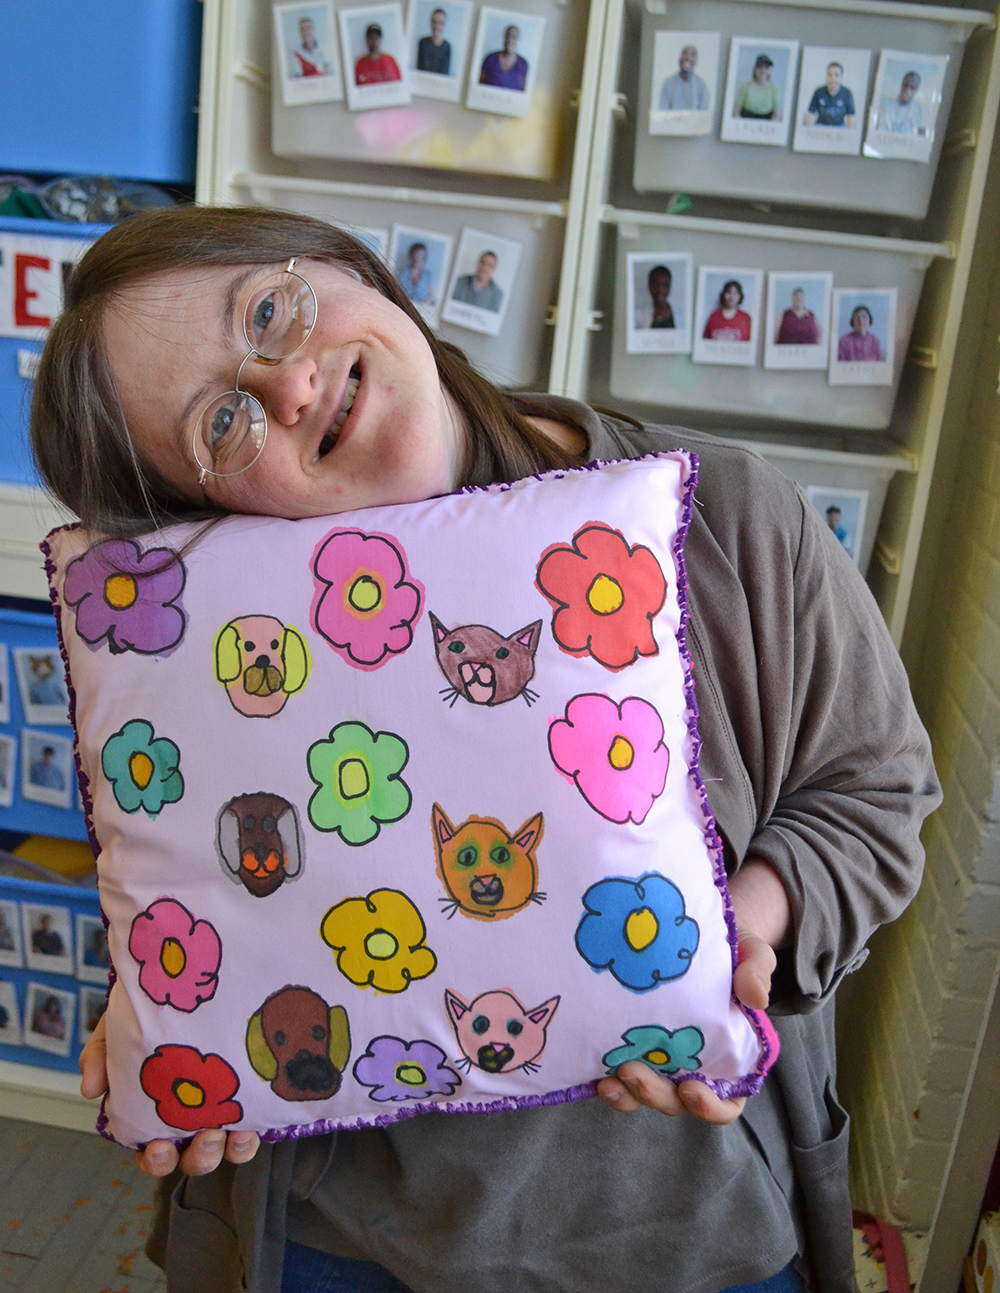 Beth Knipstein with her pillow